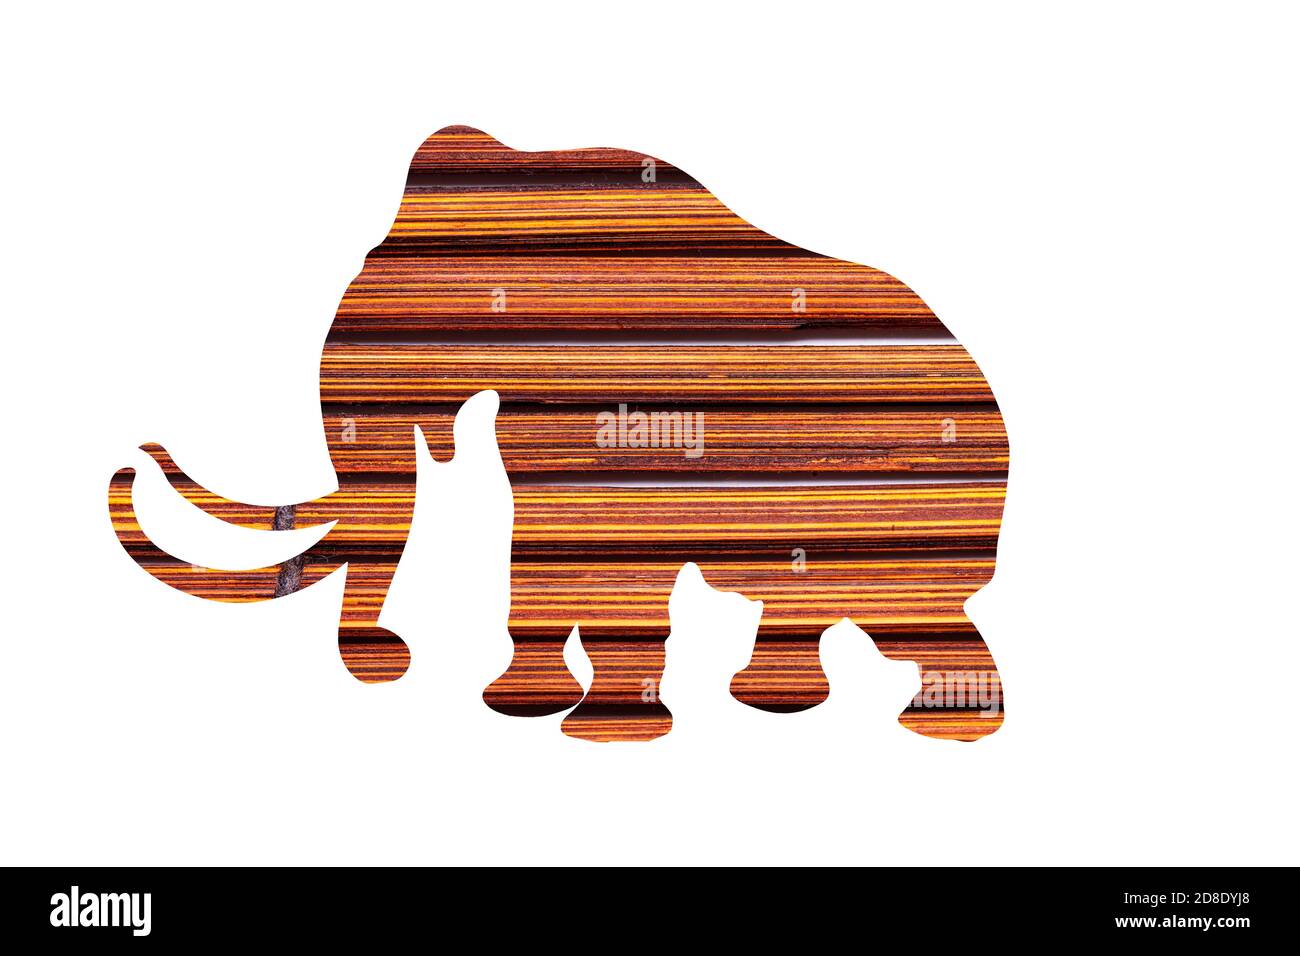 elephant silhouette with wood texture isolated on white background Stock Photo